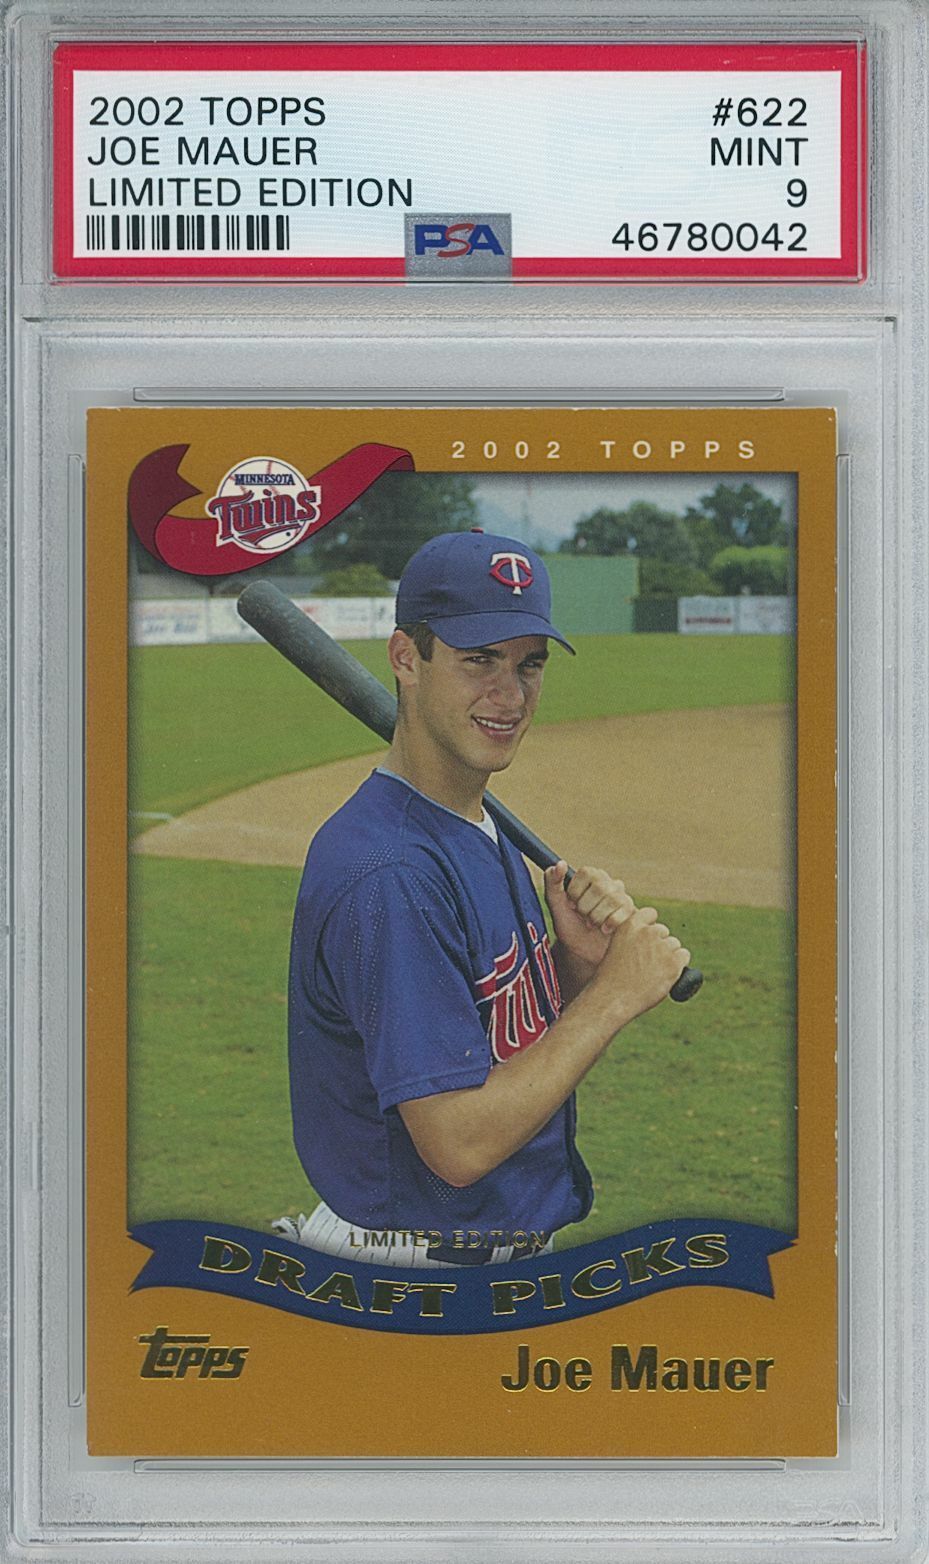 2002 Topps LIMITED GLOSSY Joe Mauer RC PSA 9 MINT ONLY 4 NONE HIGHER RARE